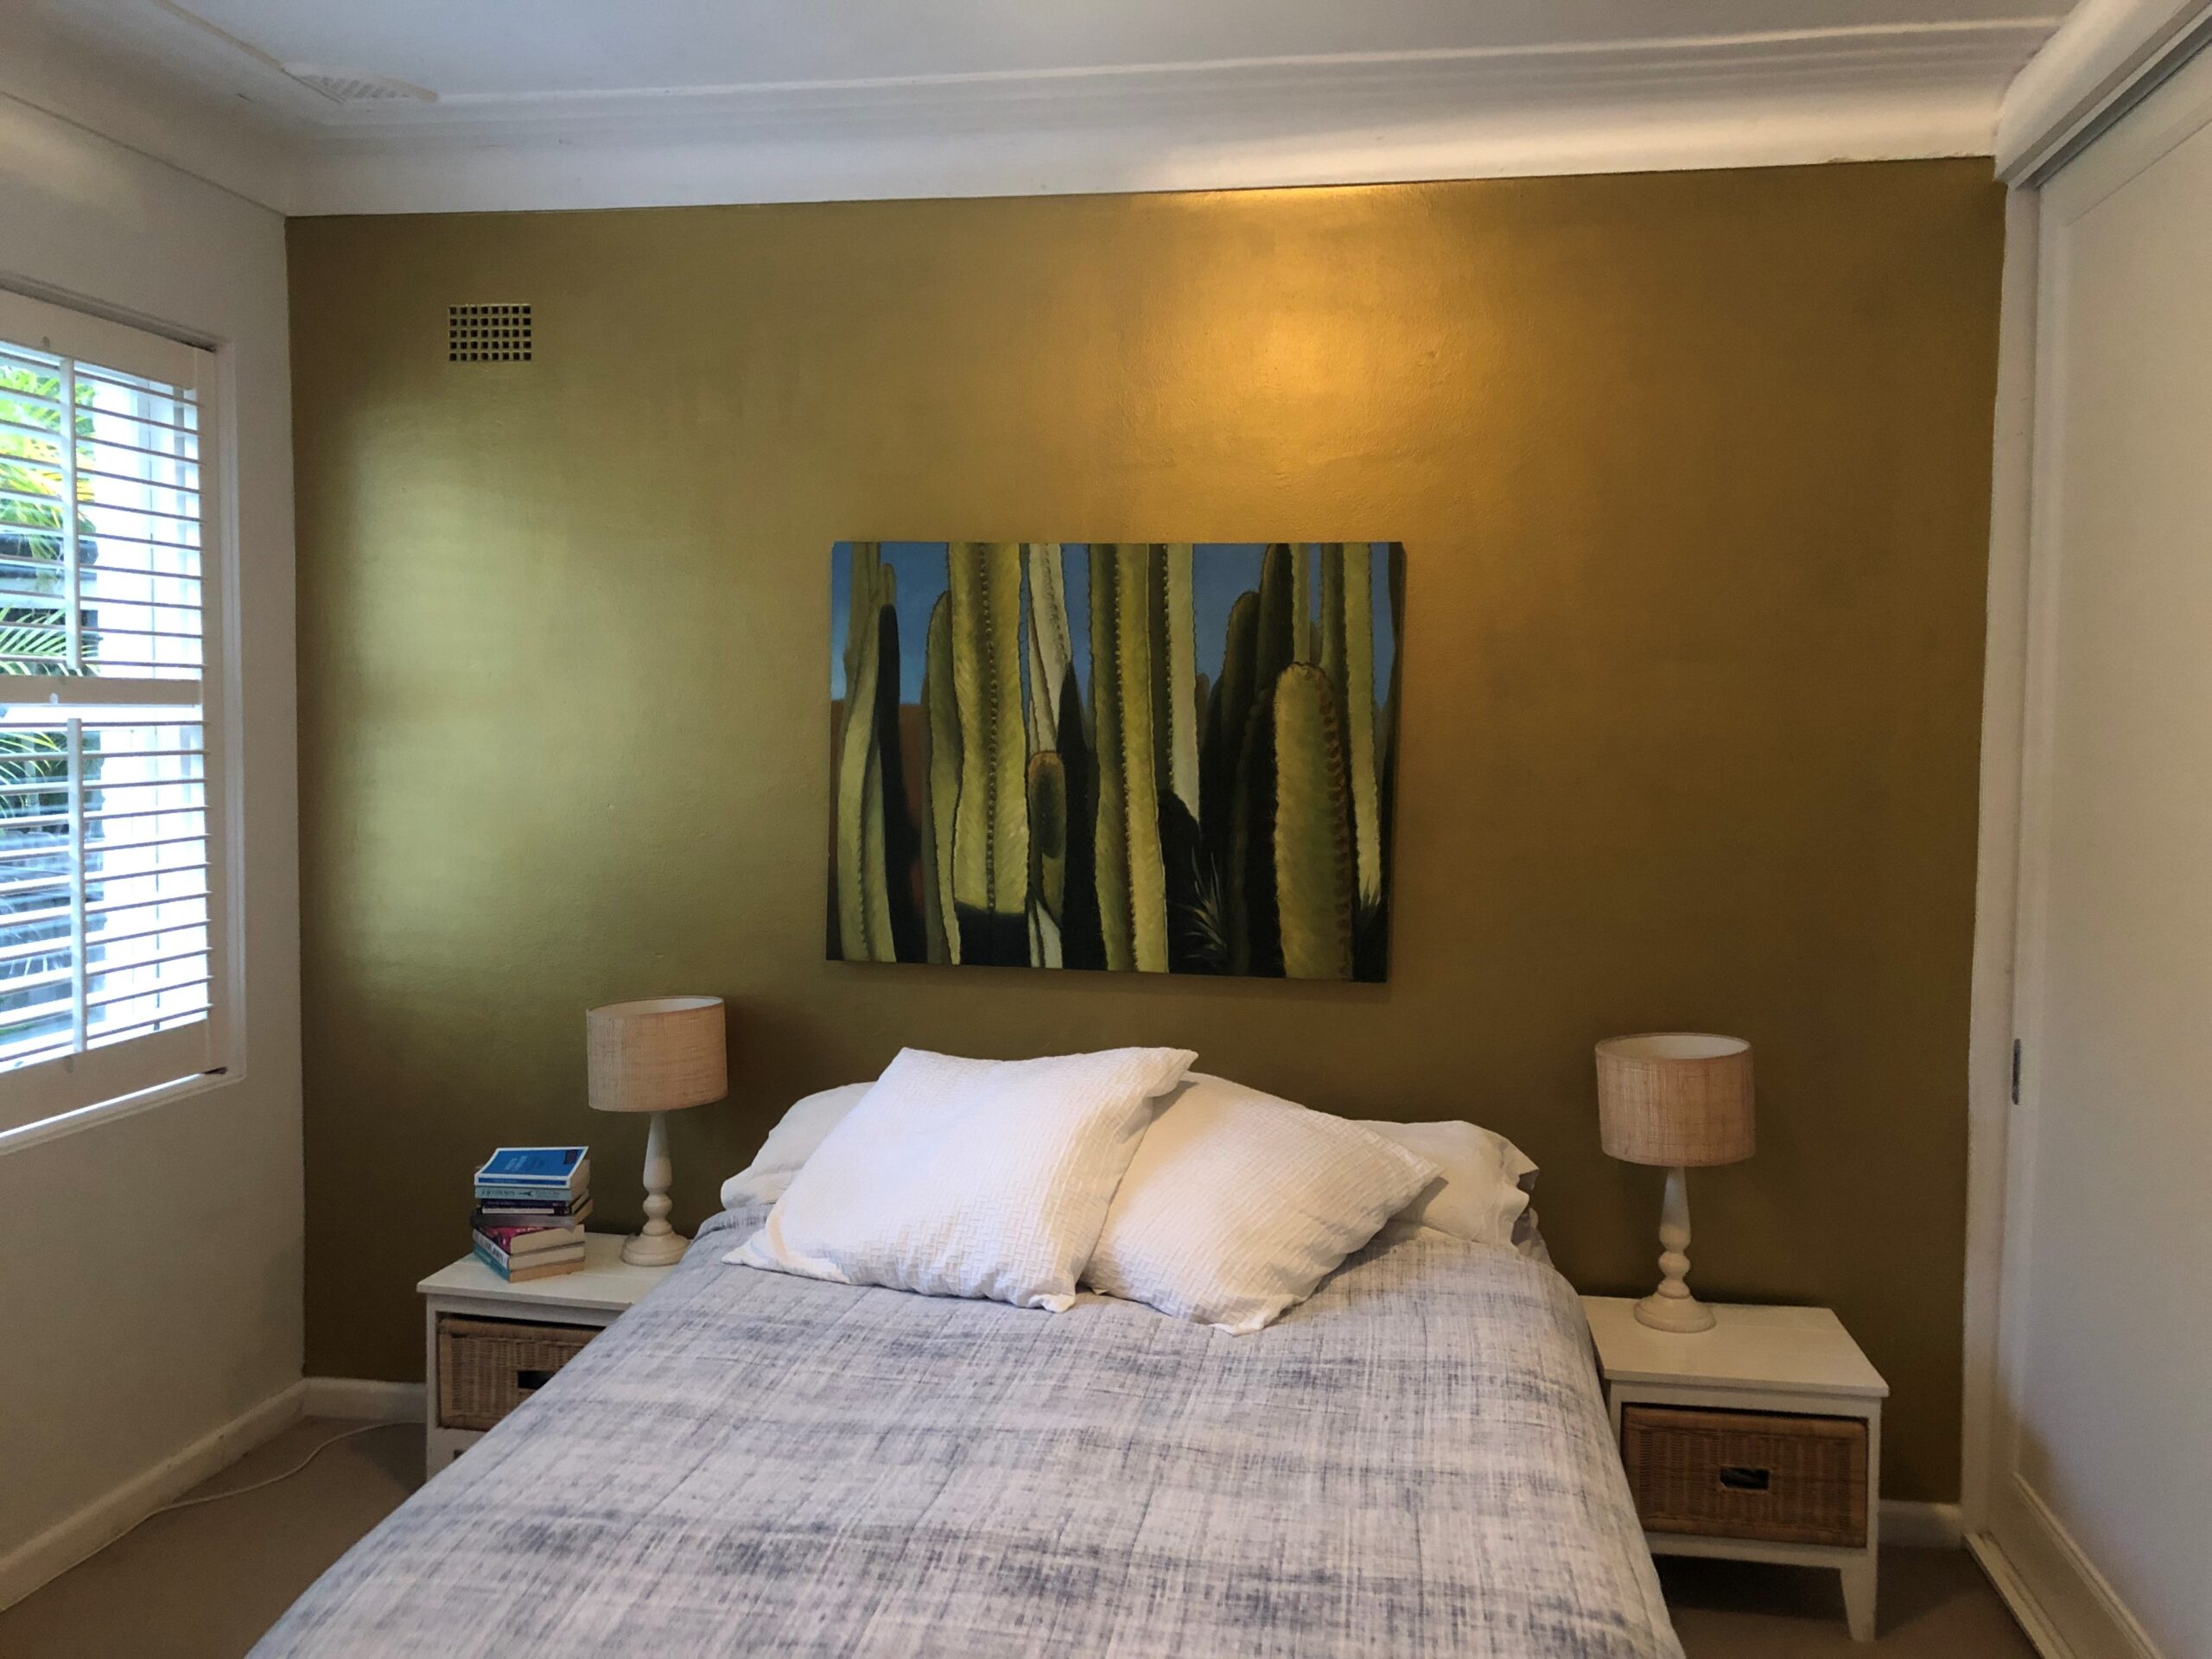 Gold Metallic Wall Paint In Dining Room